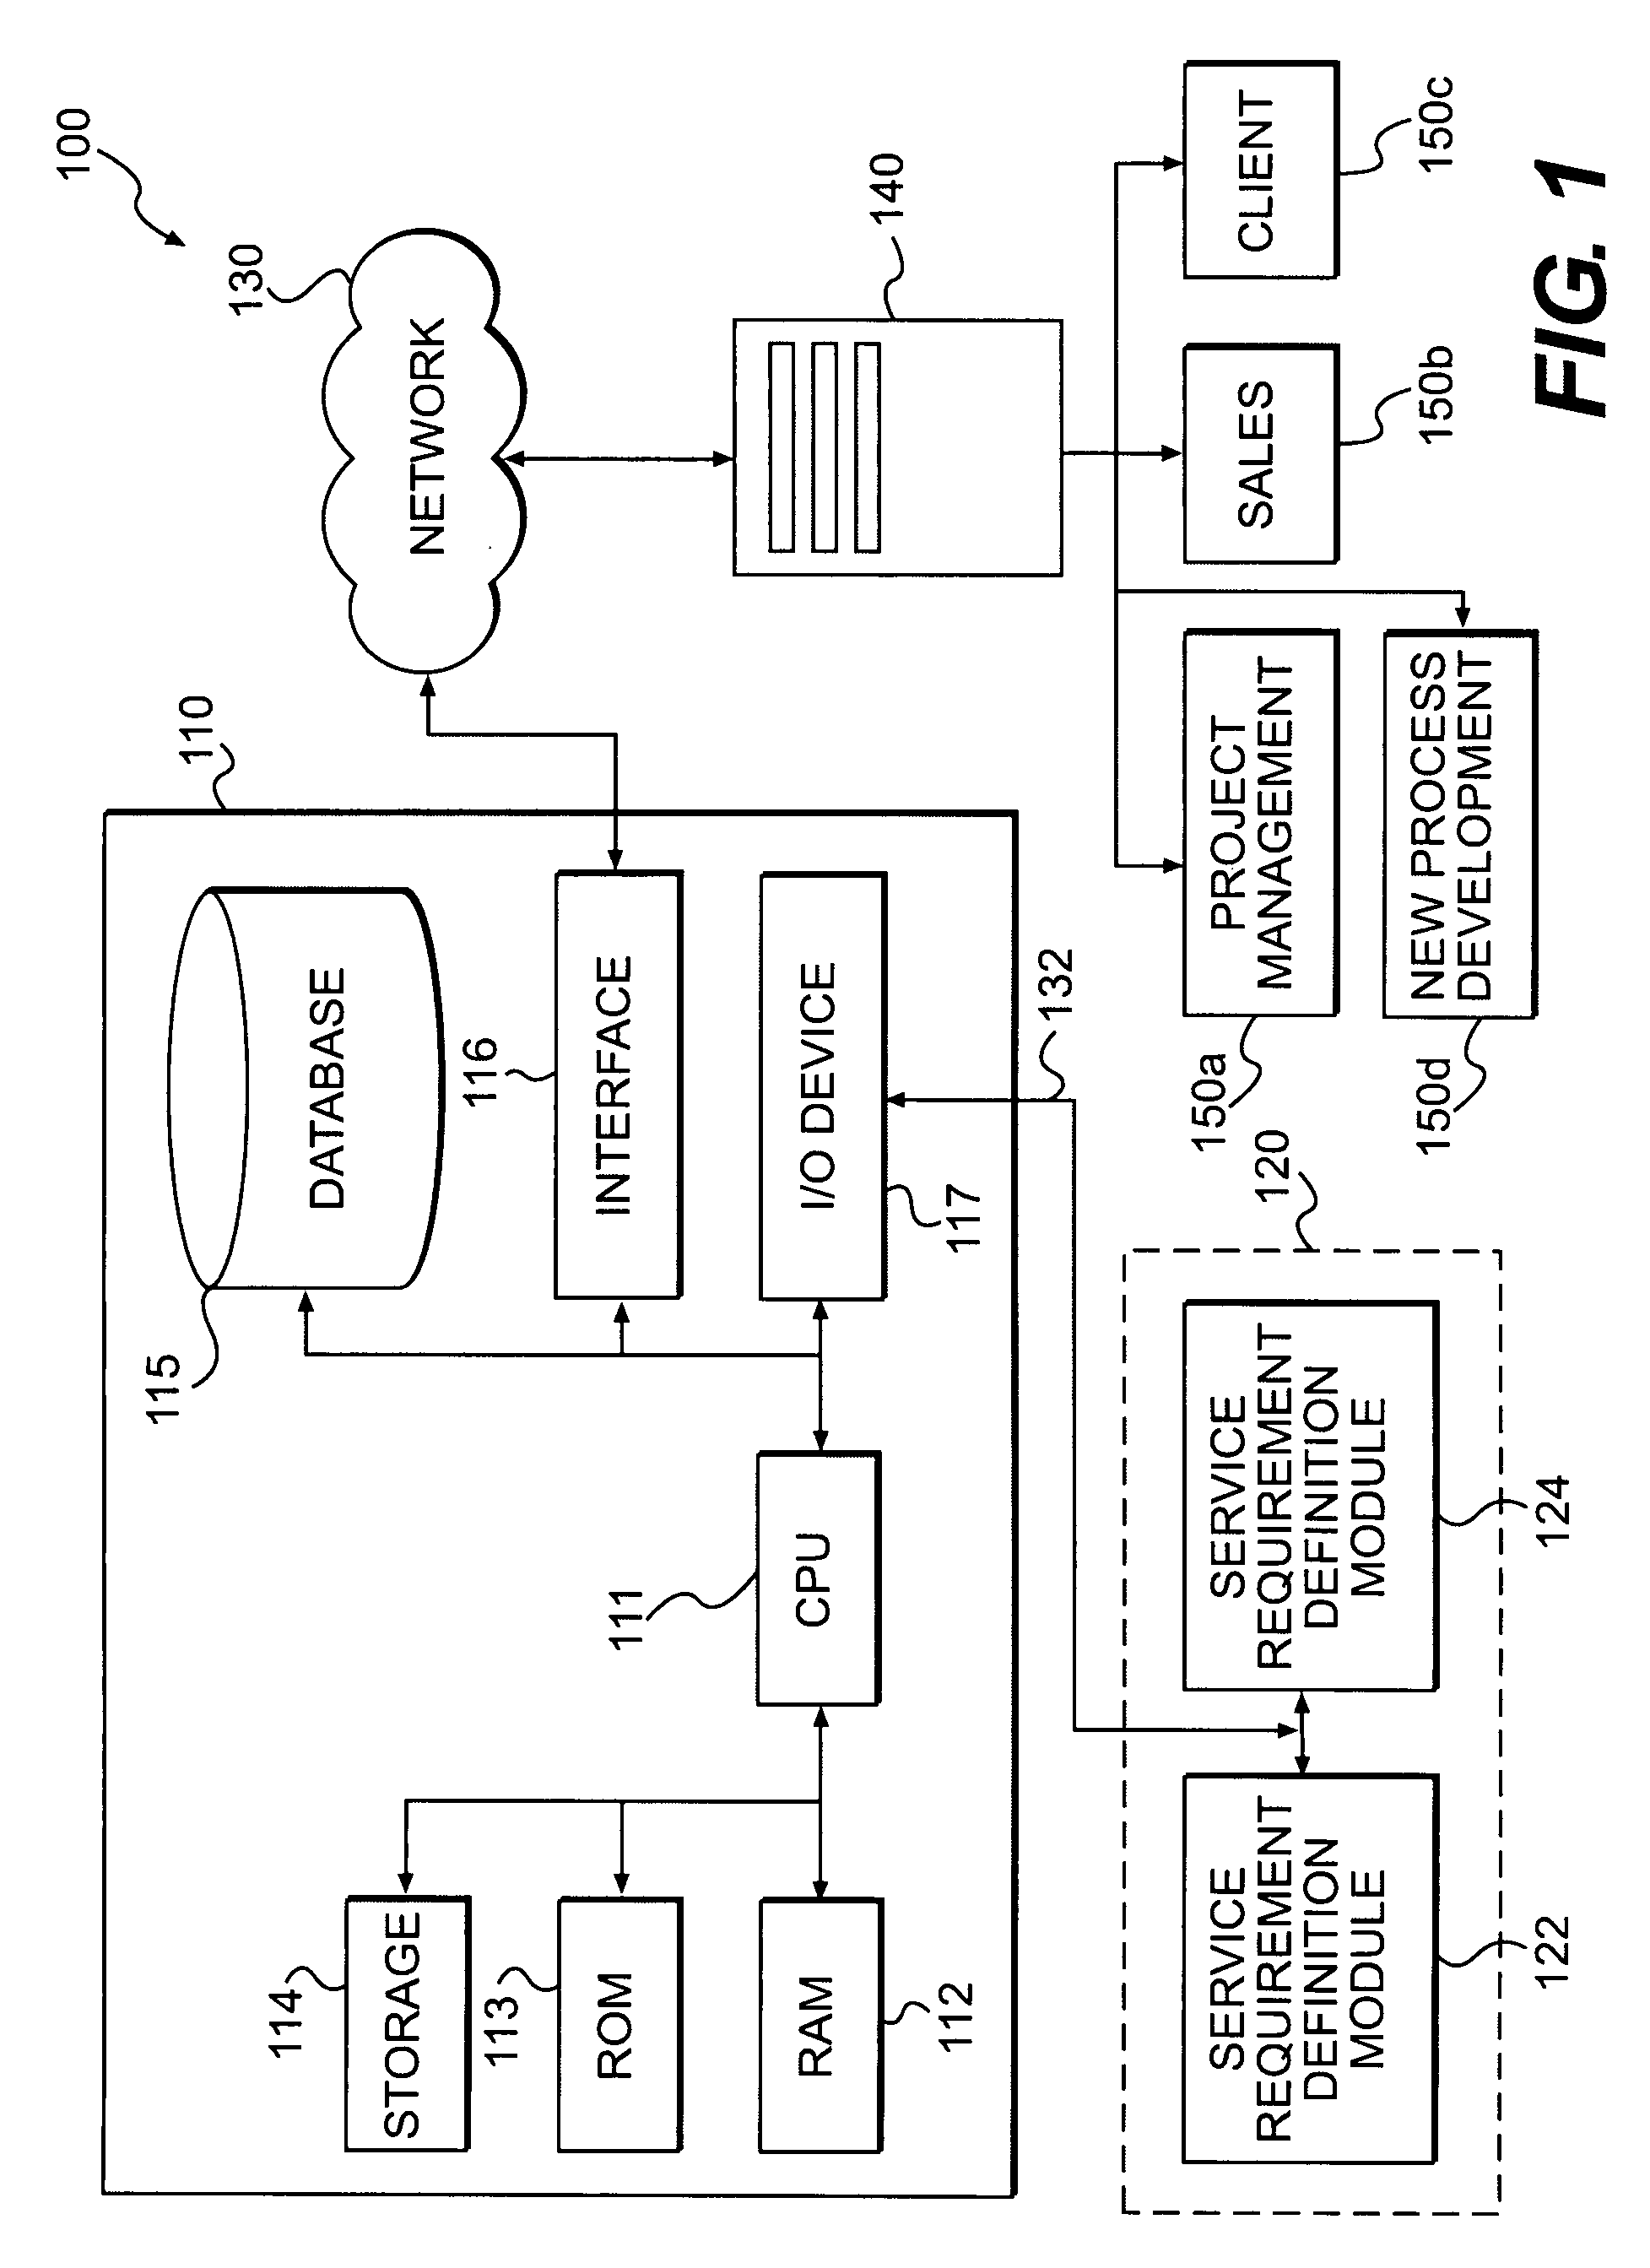 System and method for estimating a new content level in service agreements